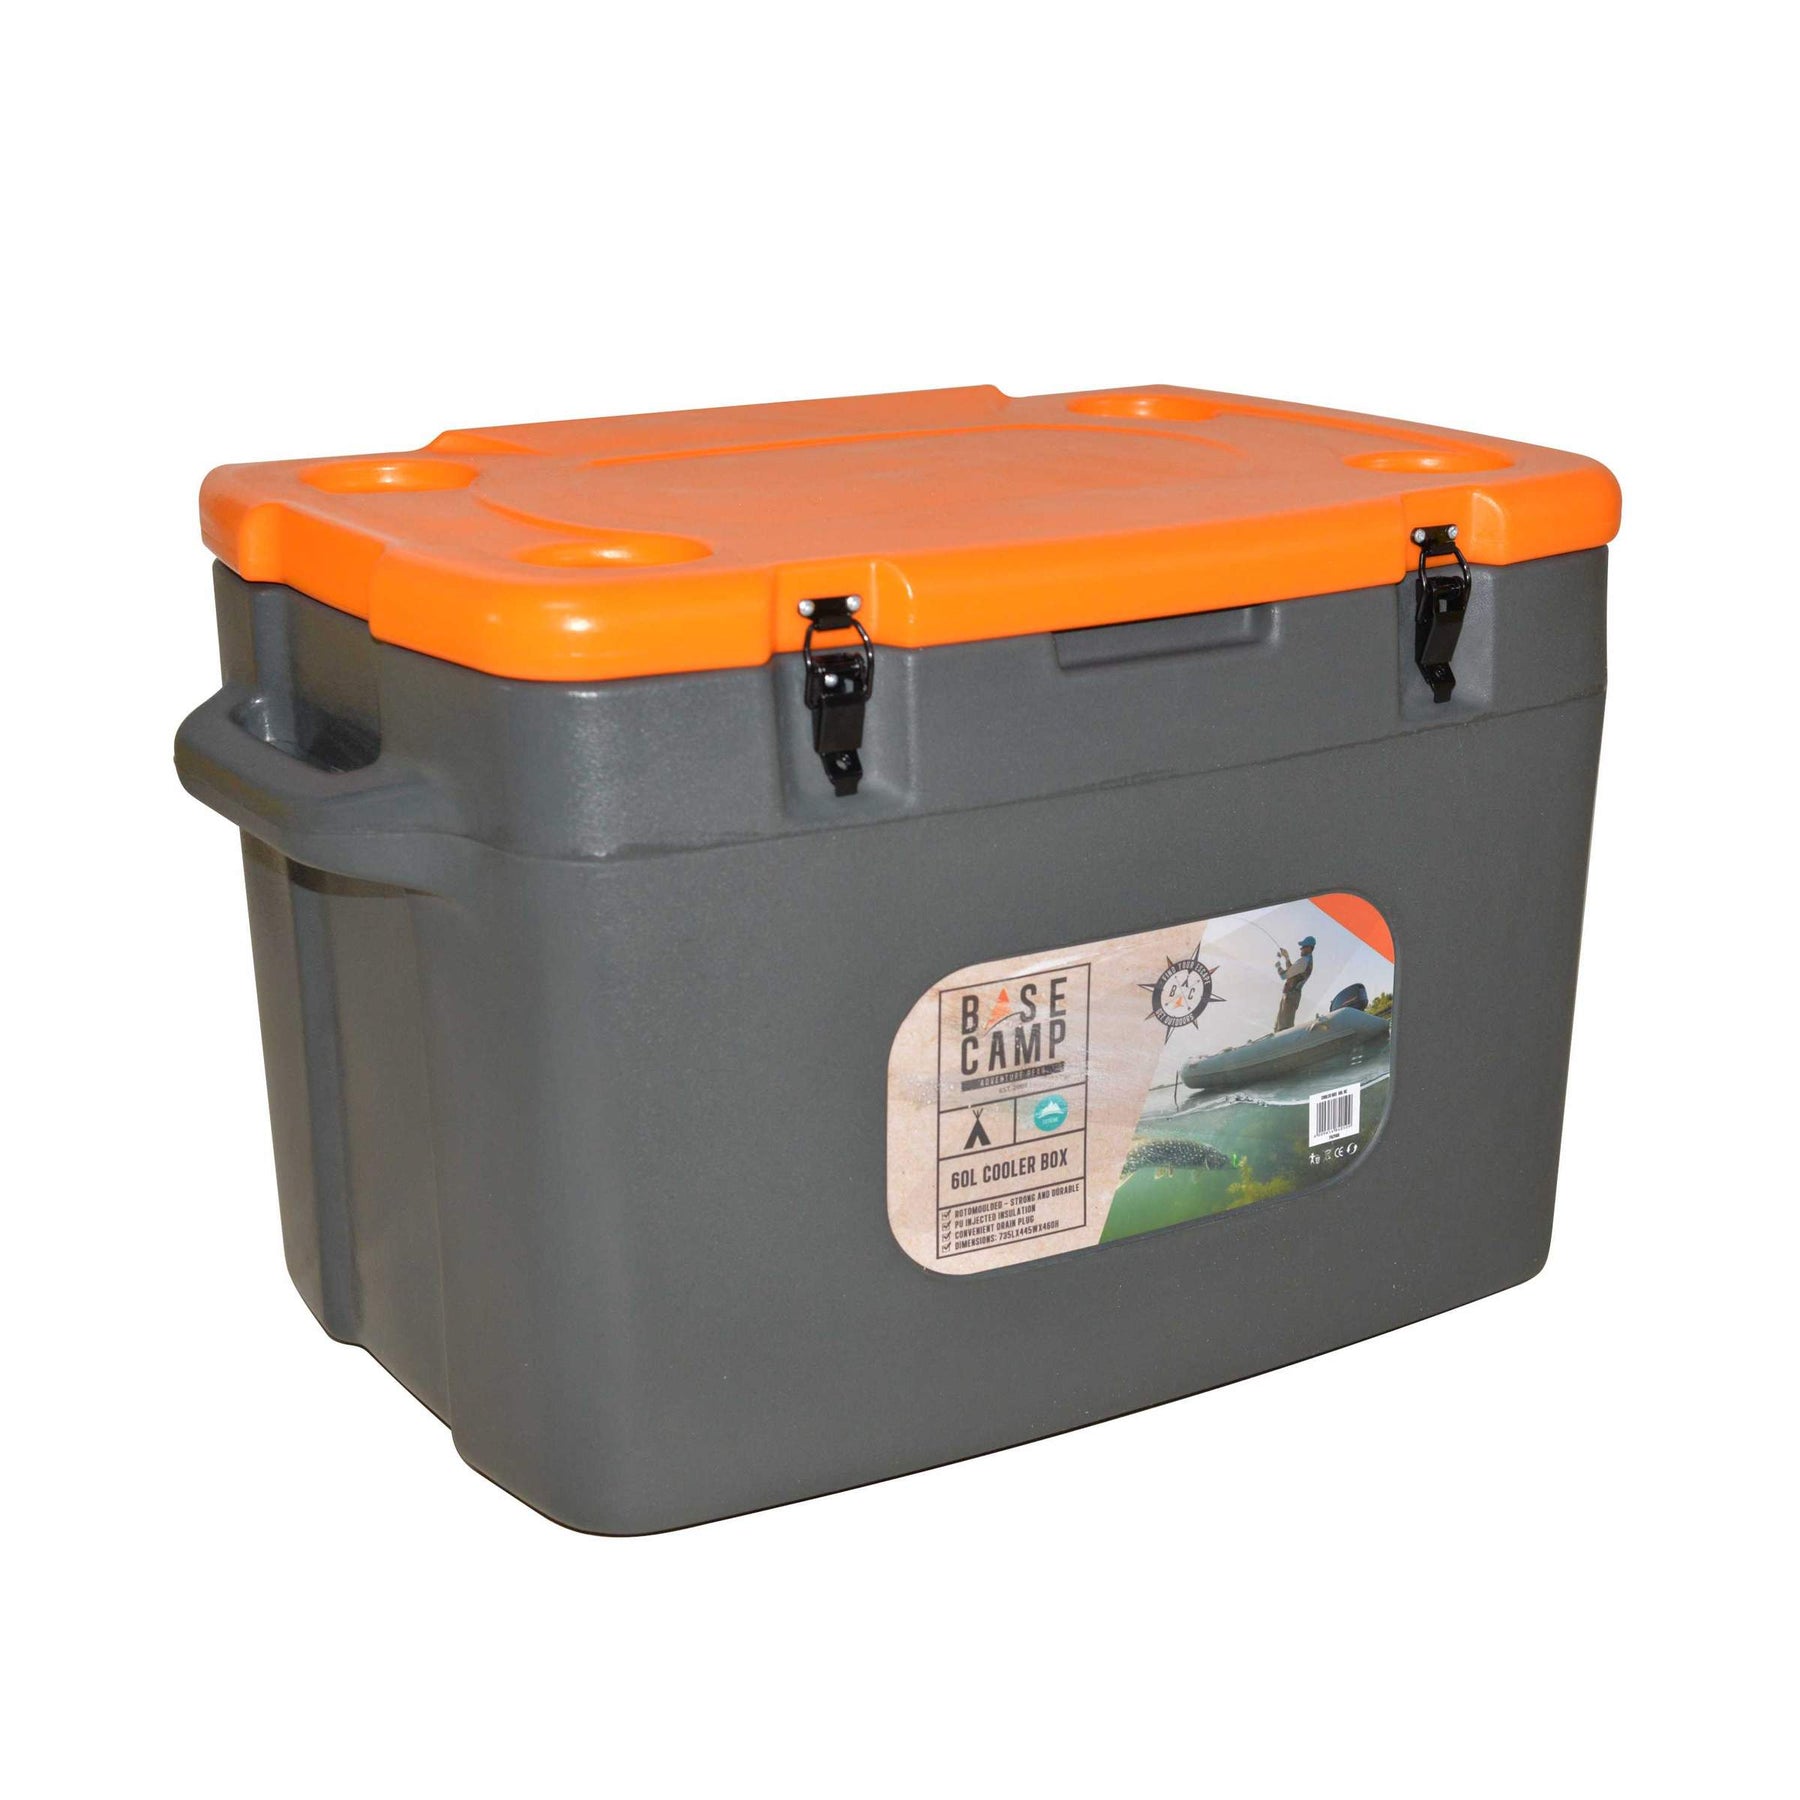 Keep Cool on a 4x4 Adventure with Cooler Boxes